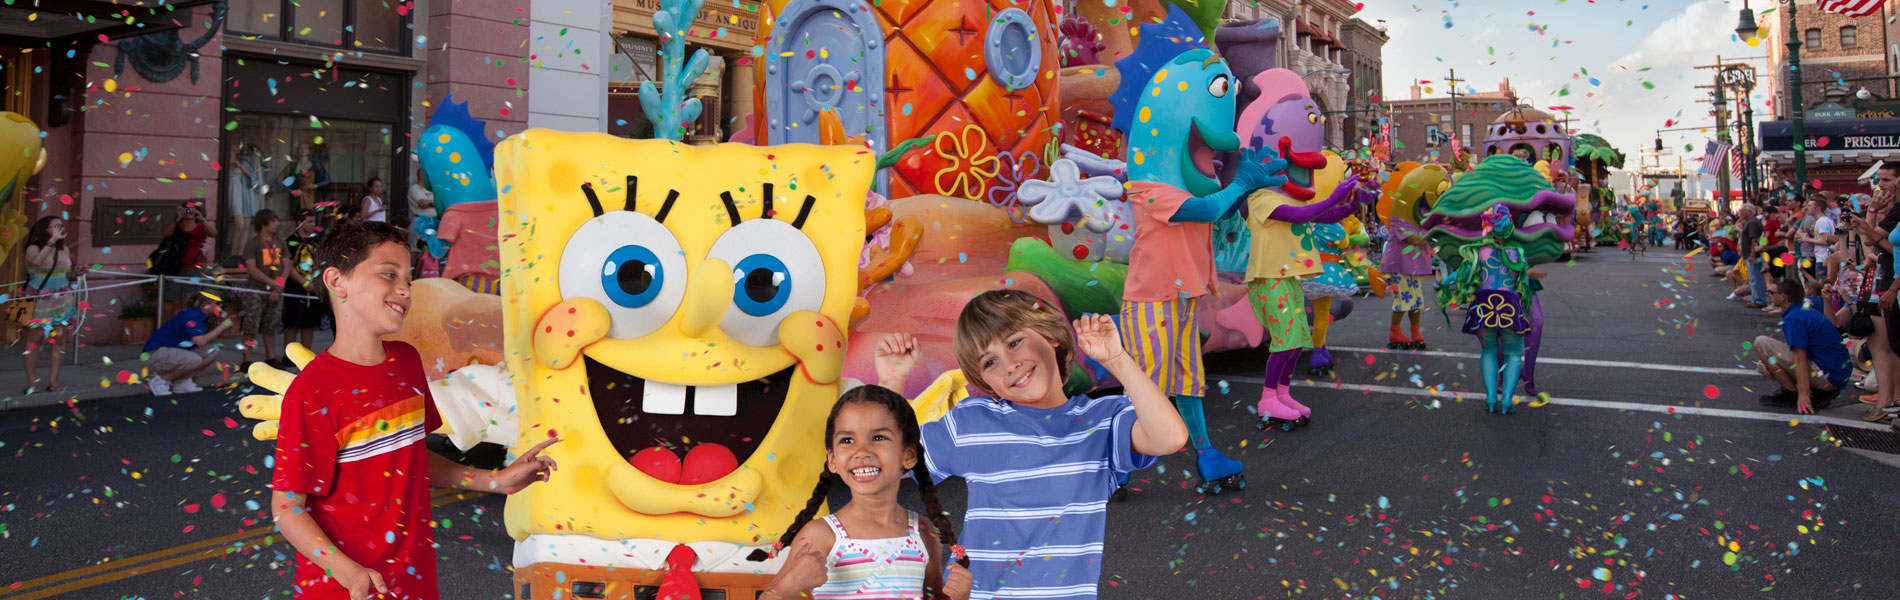 Children with SpongeBob SquarePants on a parade route